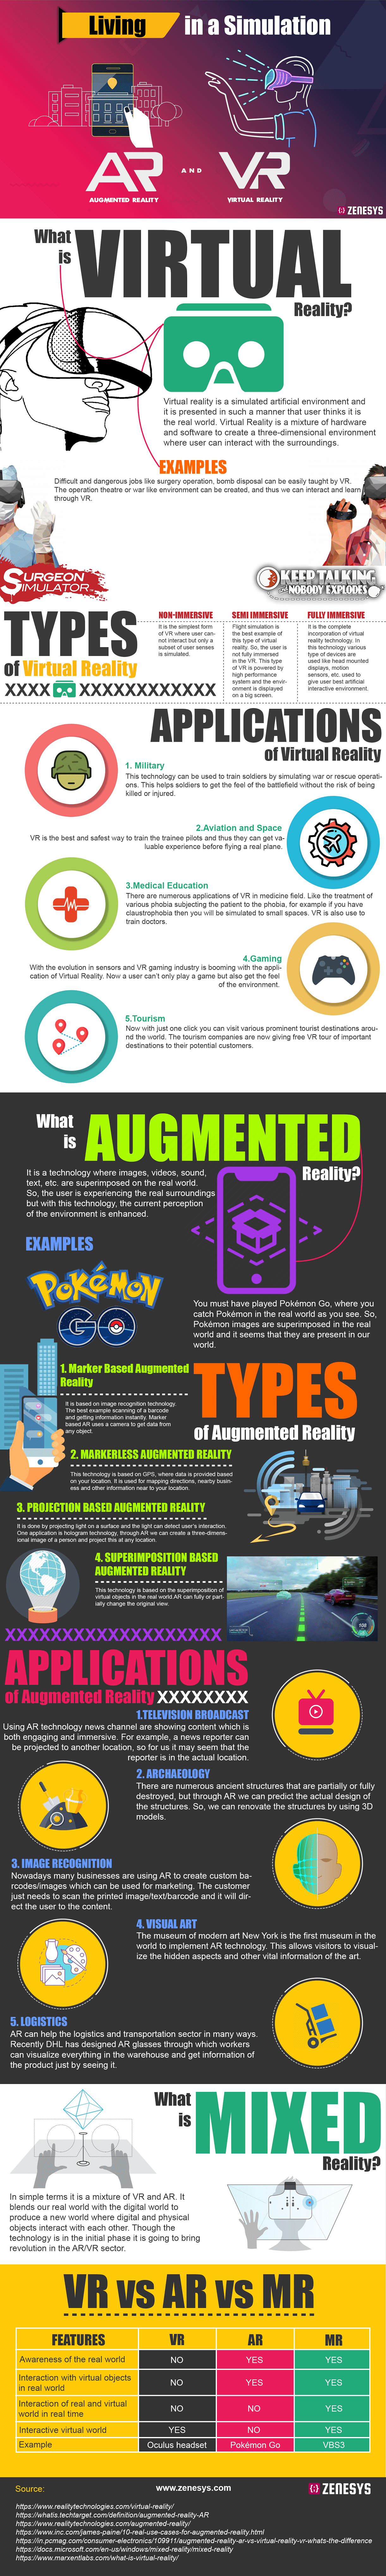 Living in a Simulation - Augmented and Virtual Reality #infographic